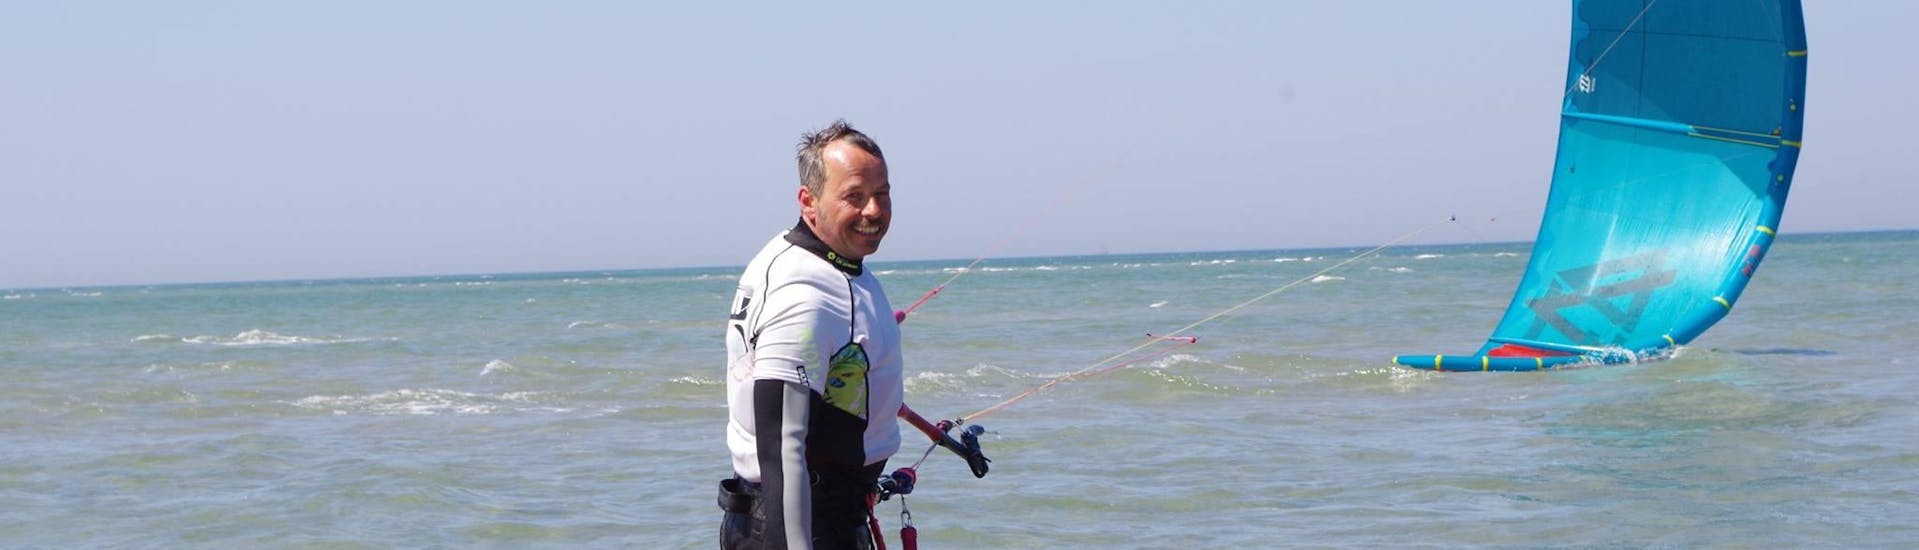 A man with his kitesurfinggear in the water during Kitesurfing Premium Lessons for Beginner from 8 years in Fehmarn with Kitesurf-Guide Fehmarn.